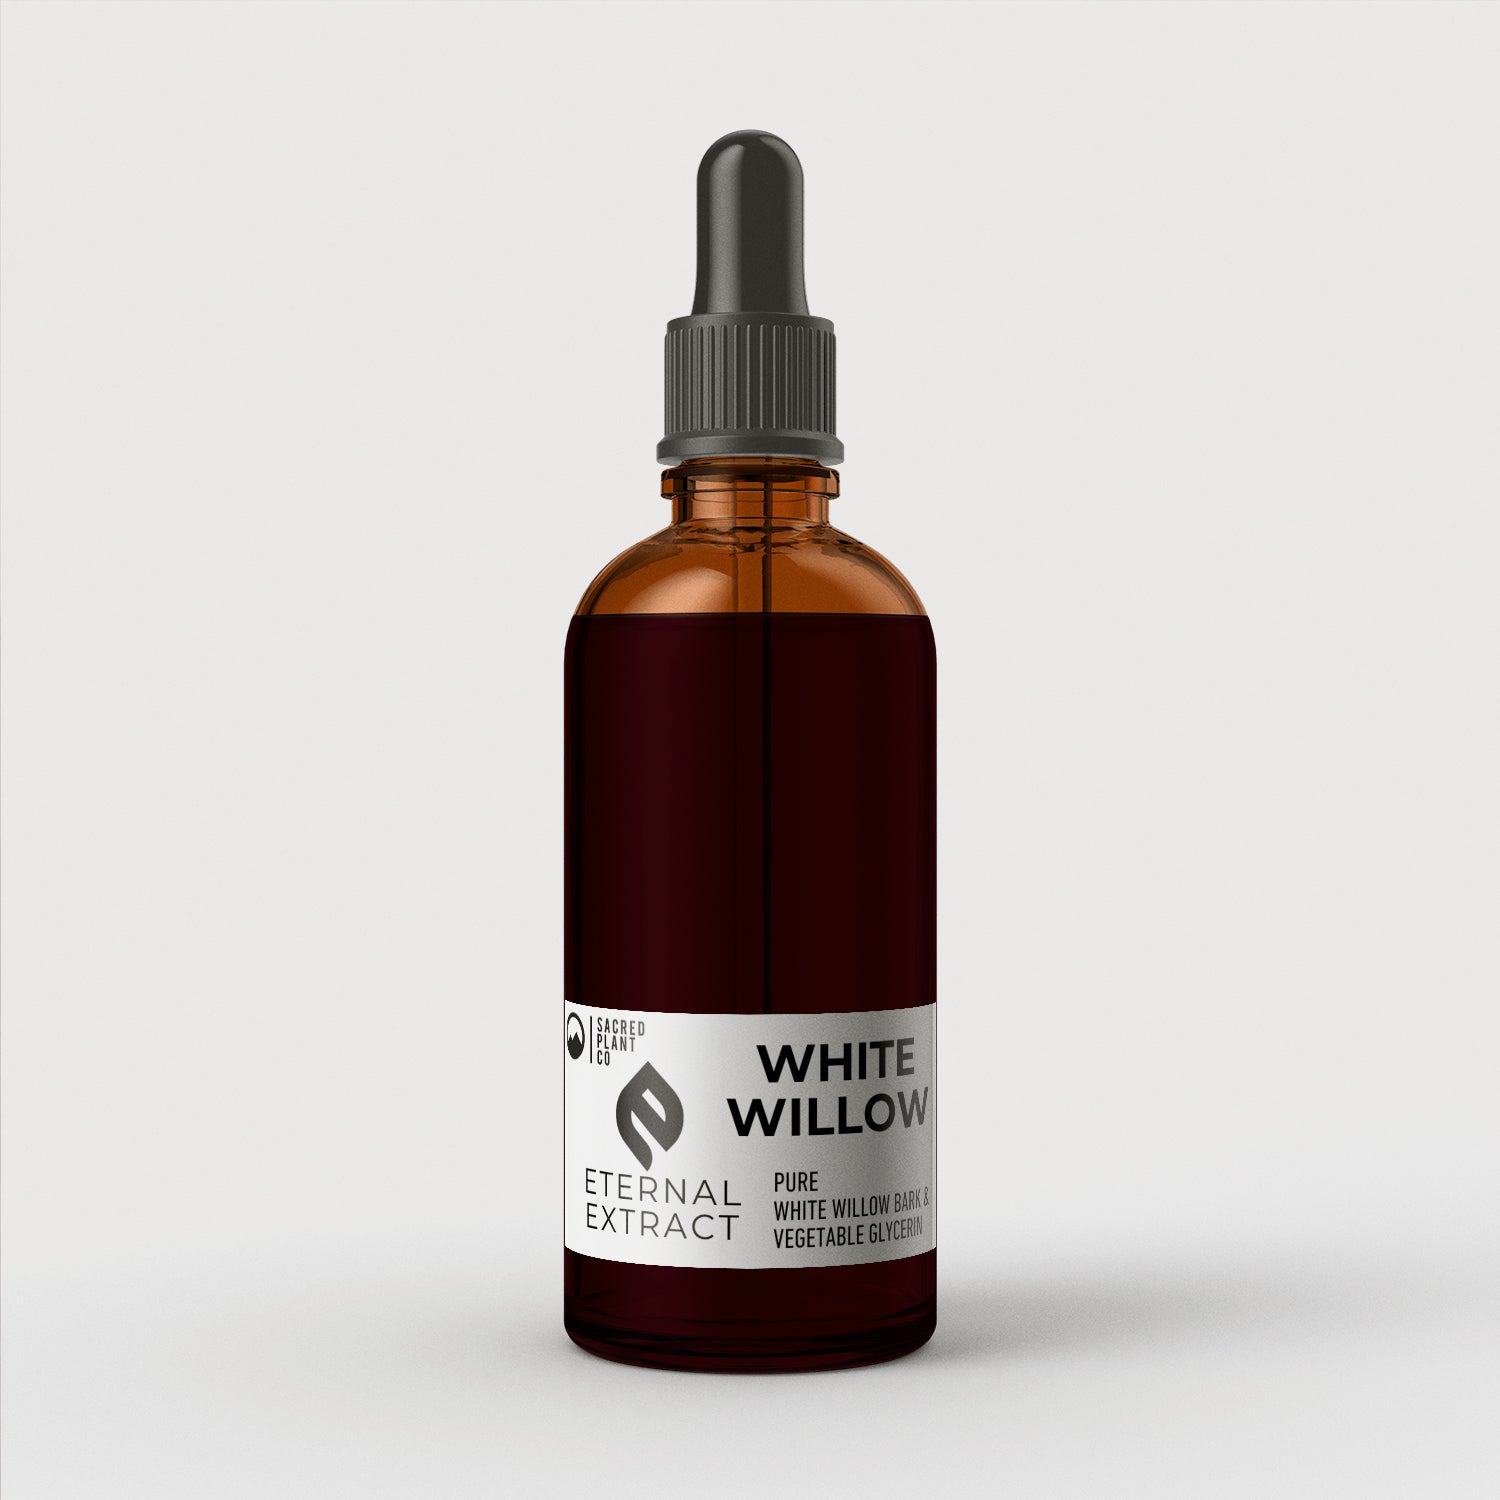 Amber glass bottle of Sacred Plant Co White Willow Bark Eternal Extract tincture with dropper, showcasing pure vegetable glycerin formulation for natural pain relief and joint support.